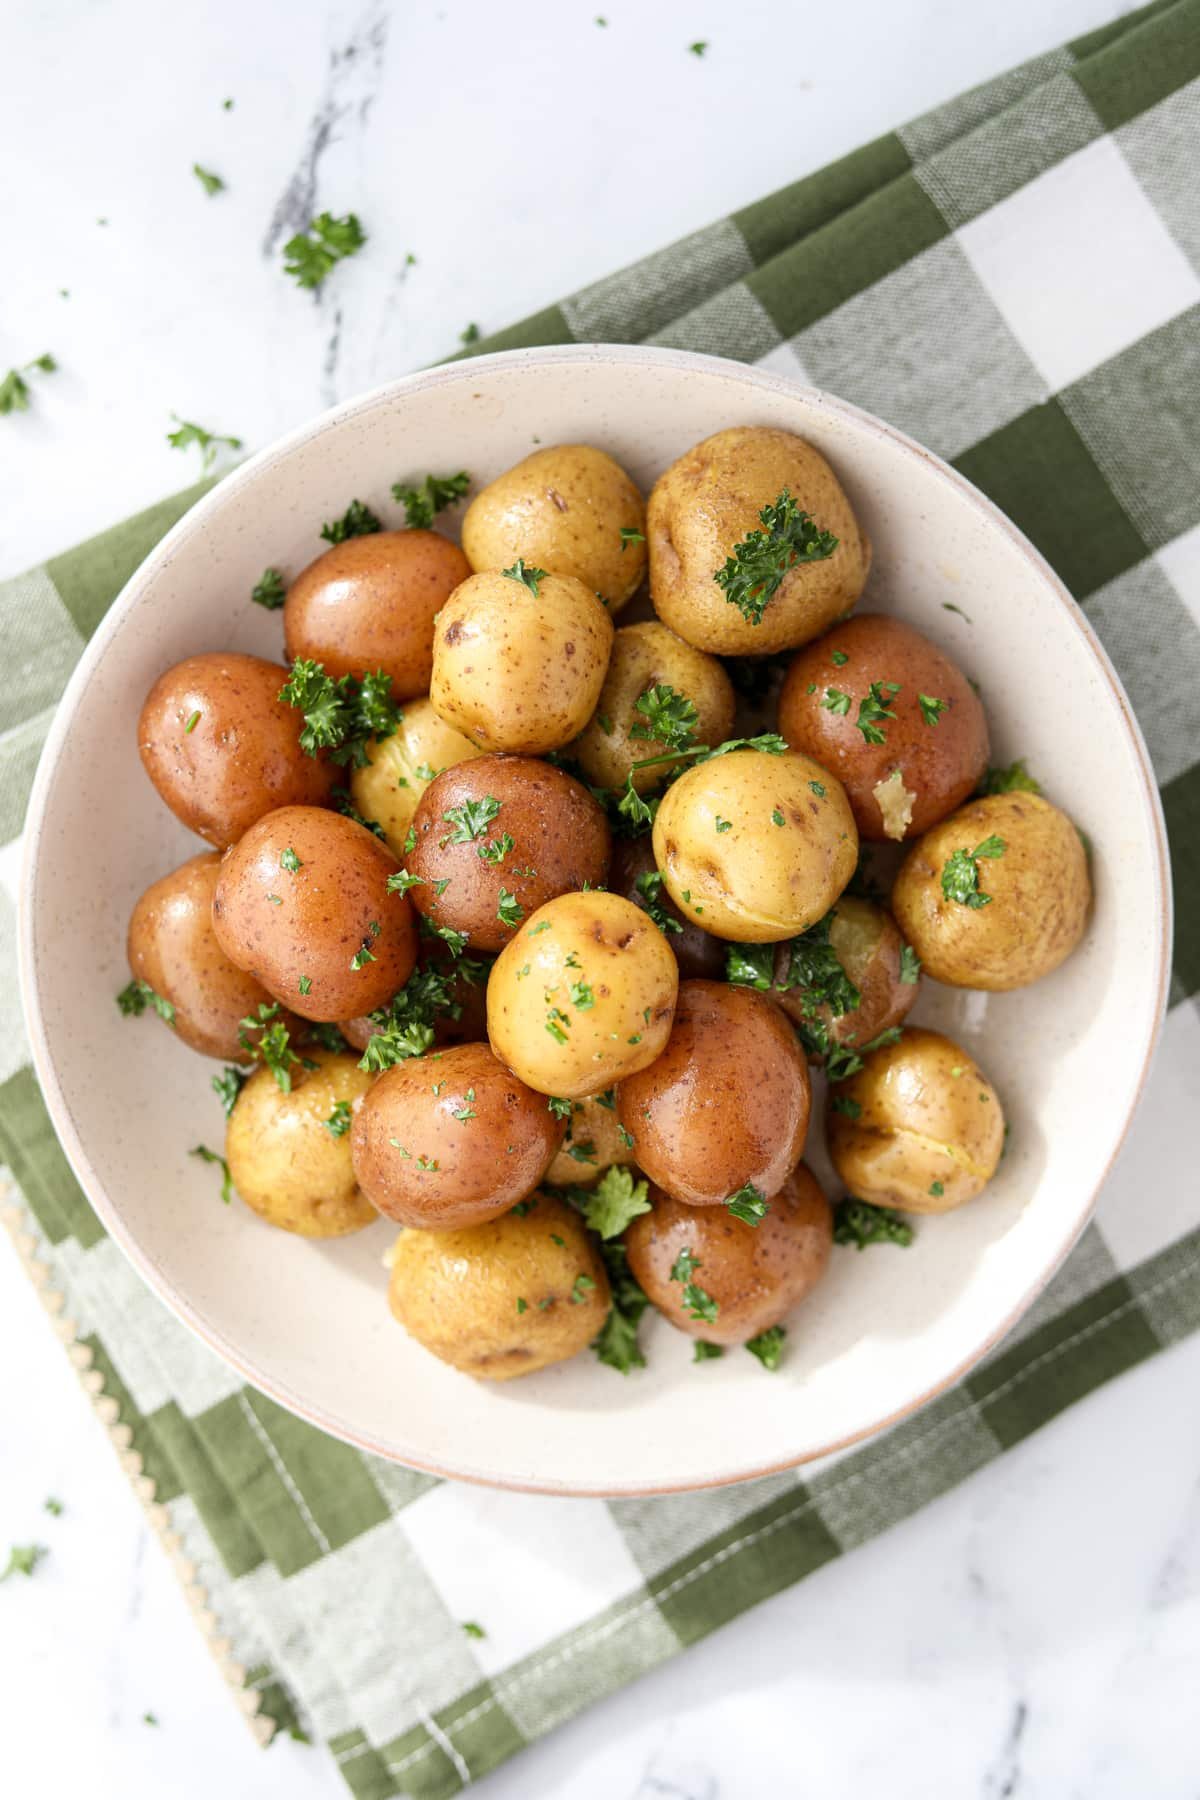 A bowl of buttered baby potatoes garnished with parsley.